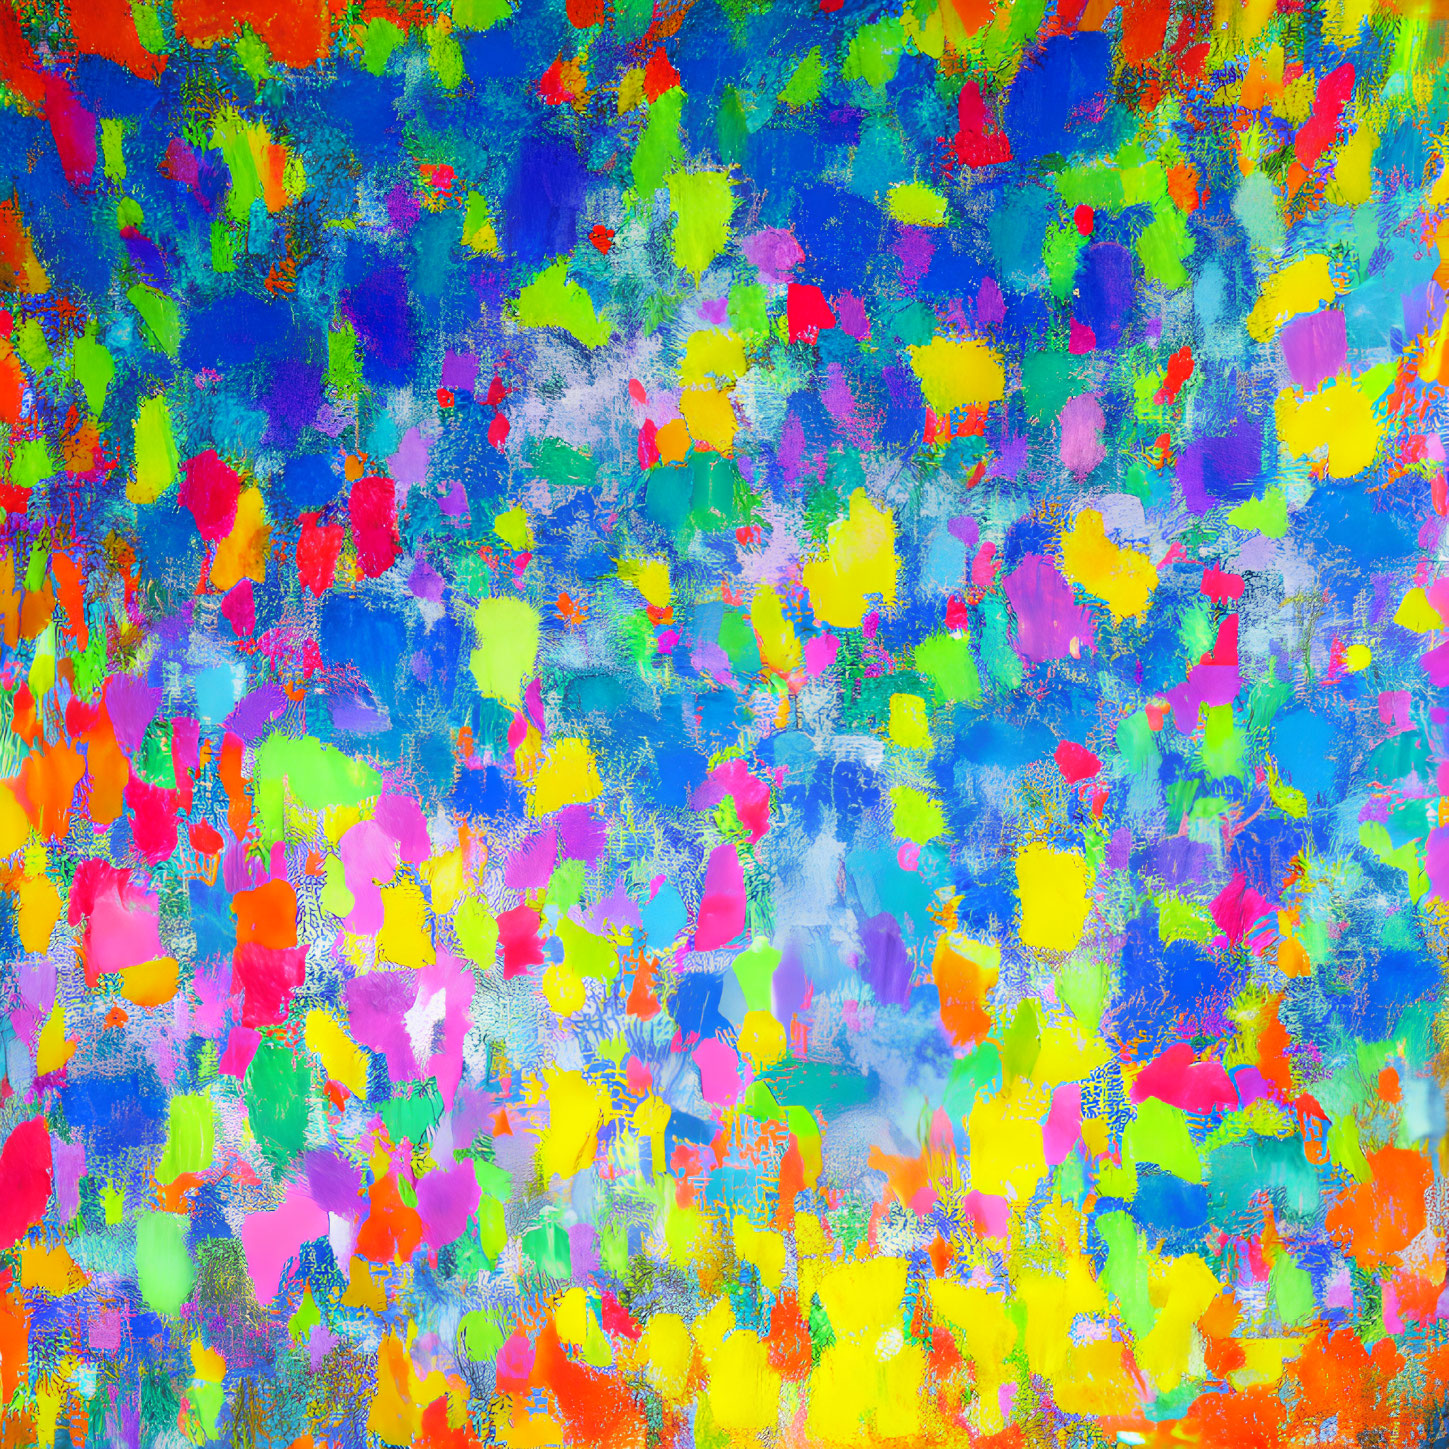 Colorful Abstract Painting with Blue, Green, Yellow, Pink, and Orange Splashes